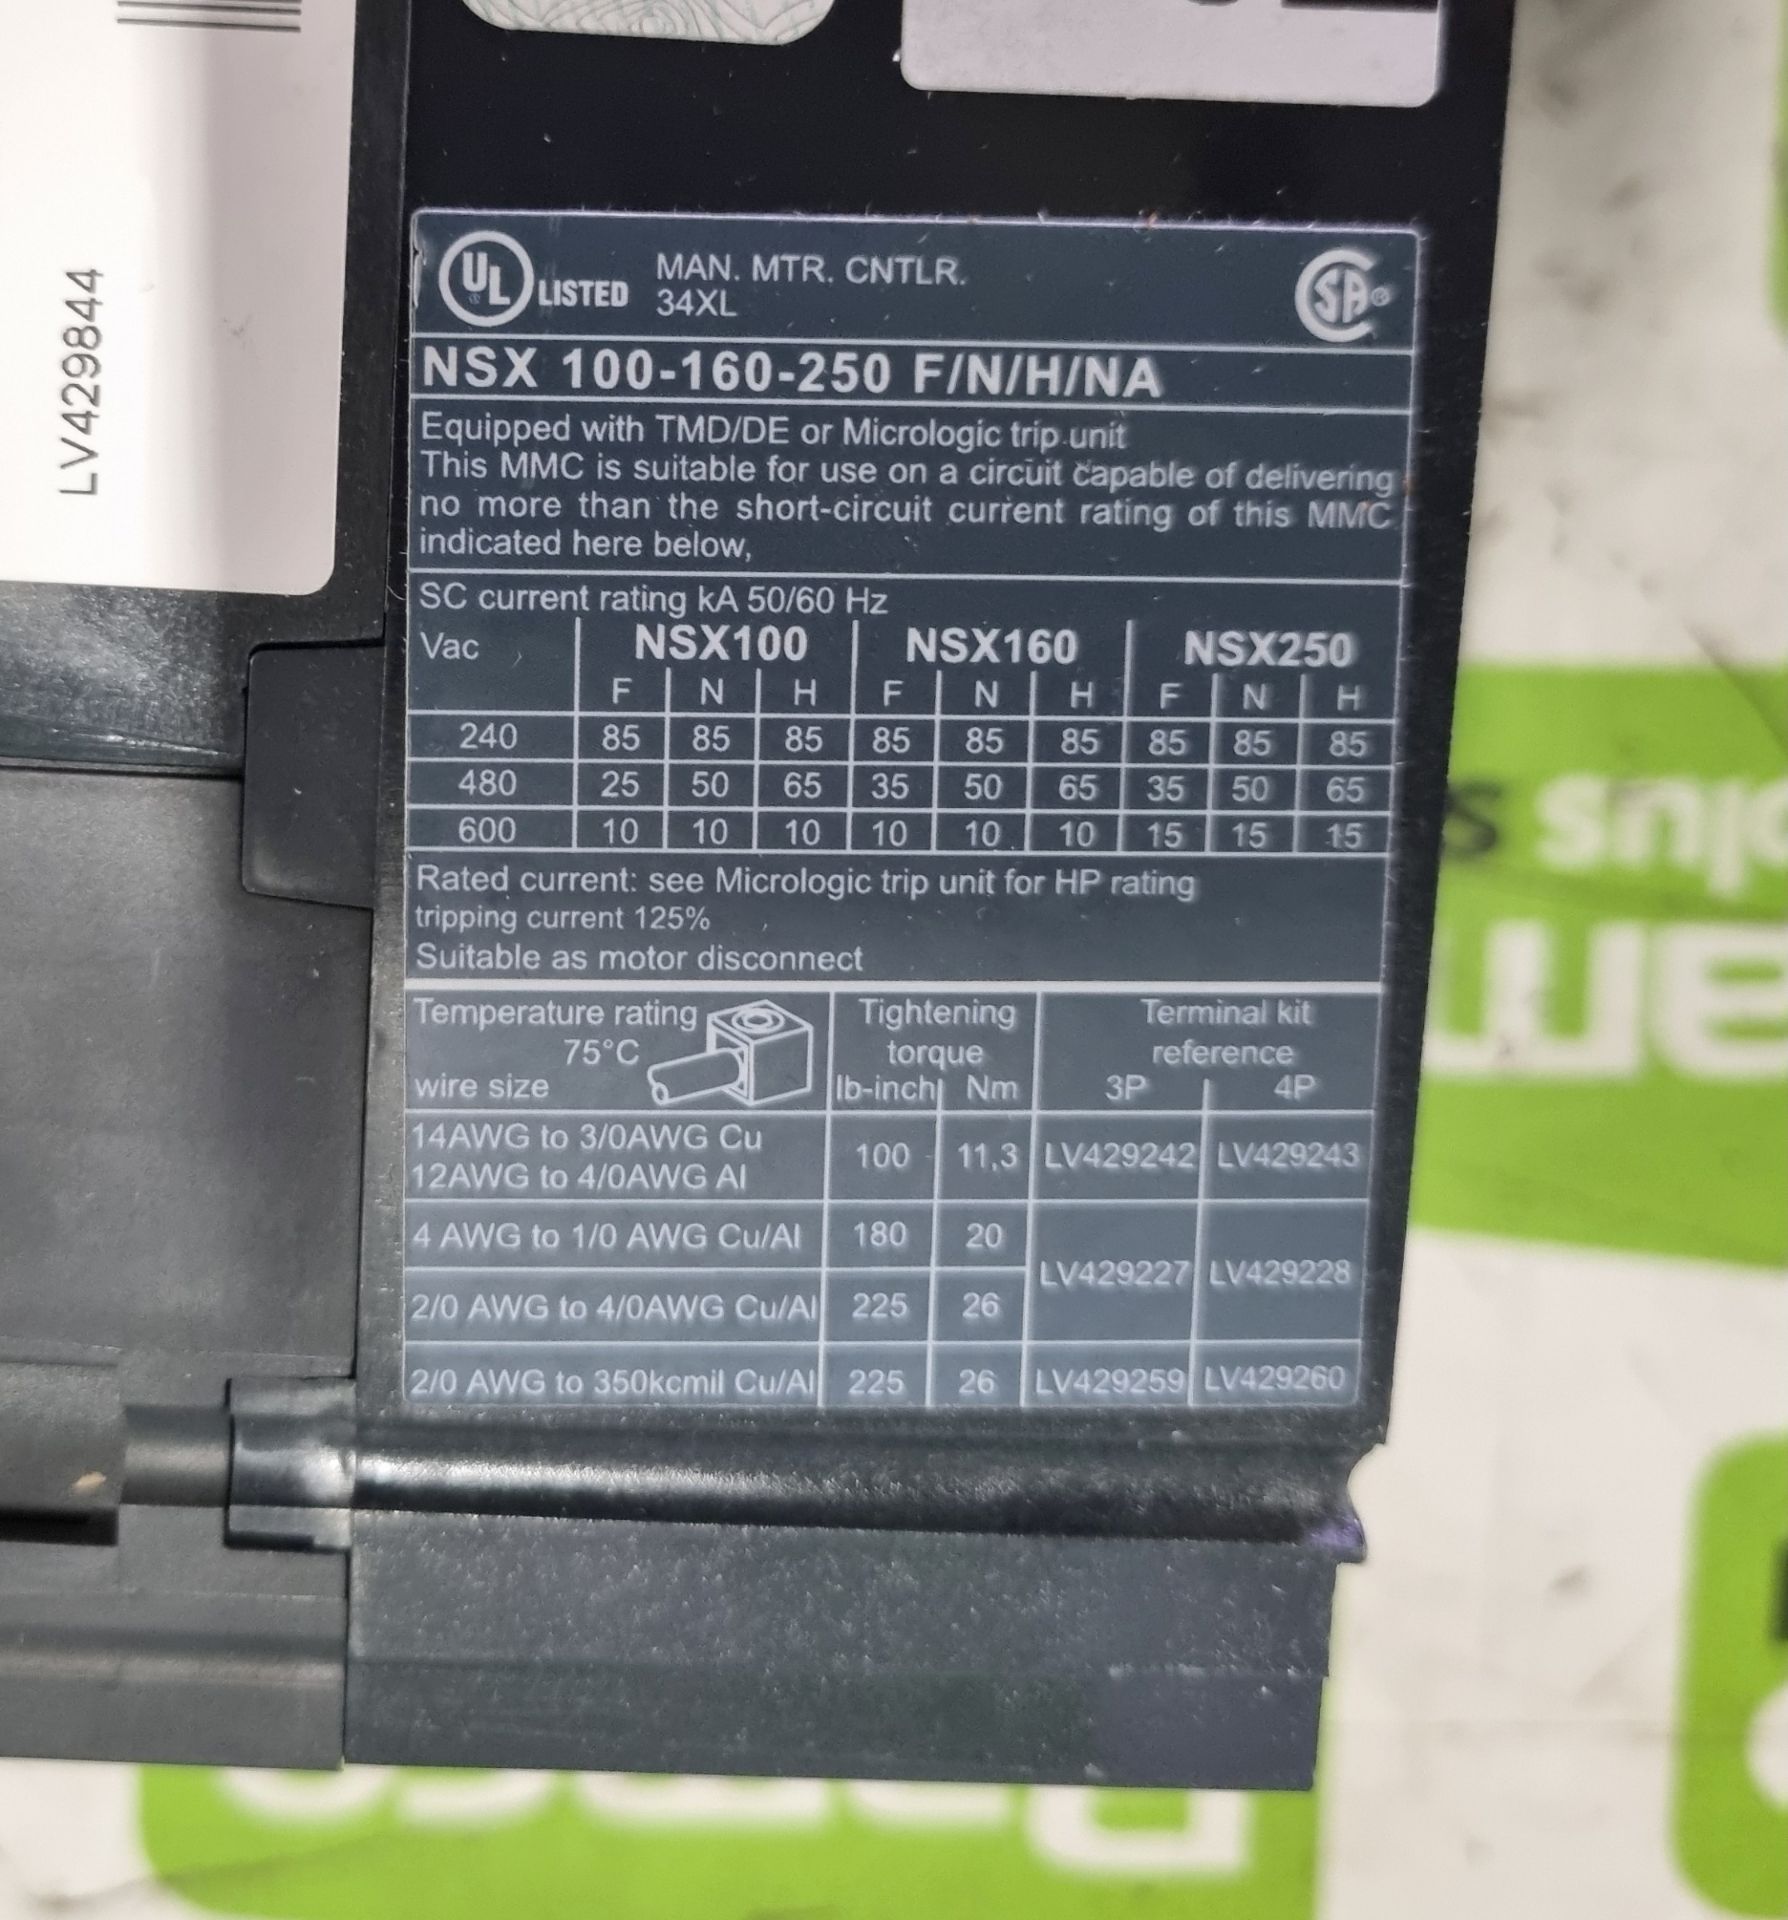 3x Schneider Electric MGP0403XN Powerpact 4 molded case circuit breakers - 3 phase - 415V - 40A - Image 4 of 5